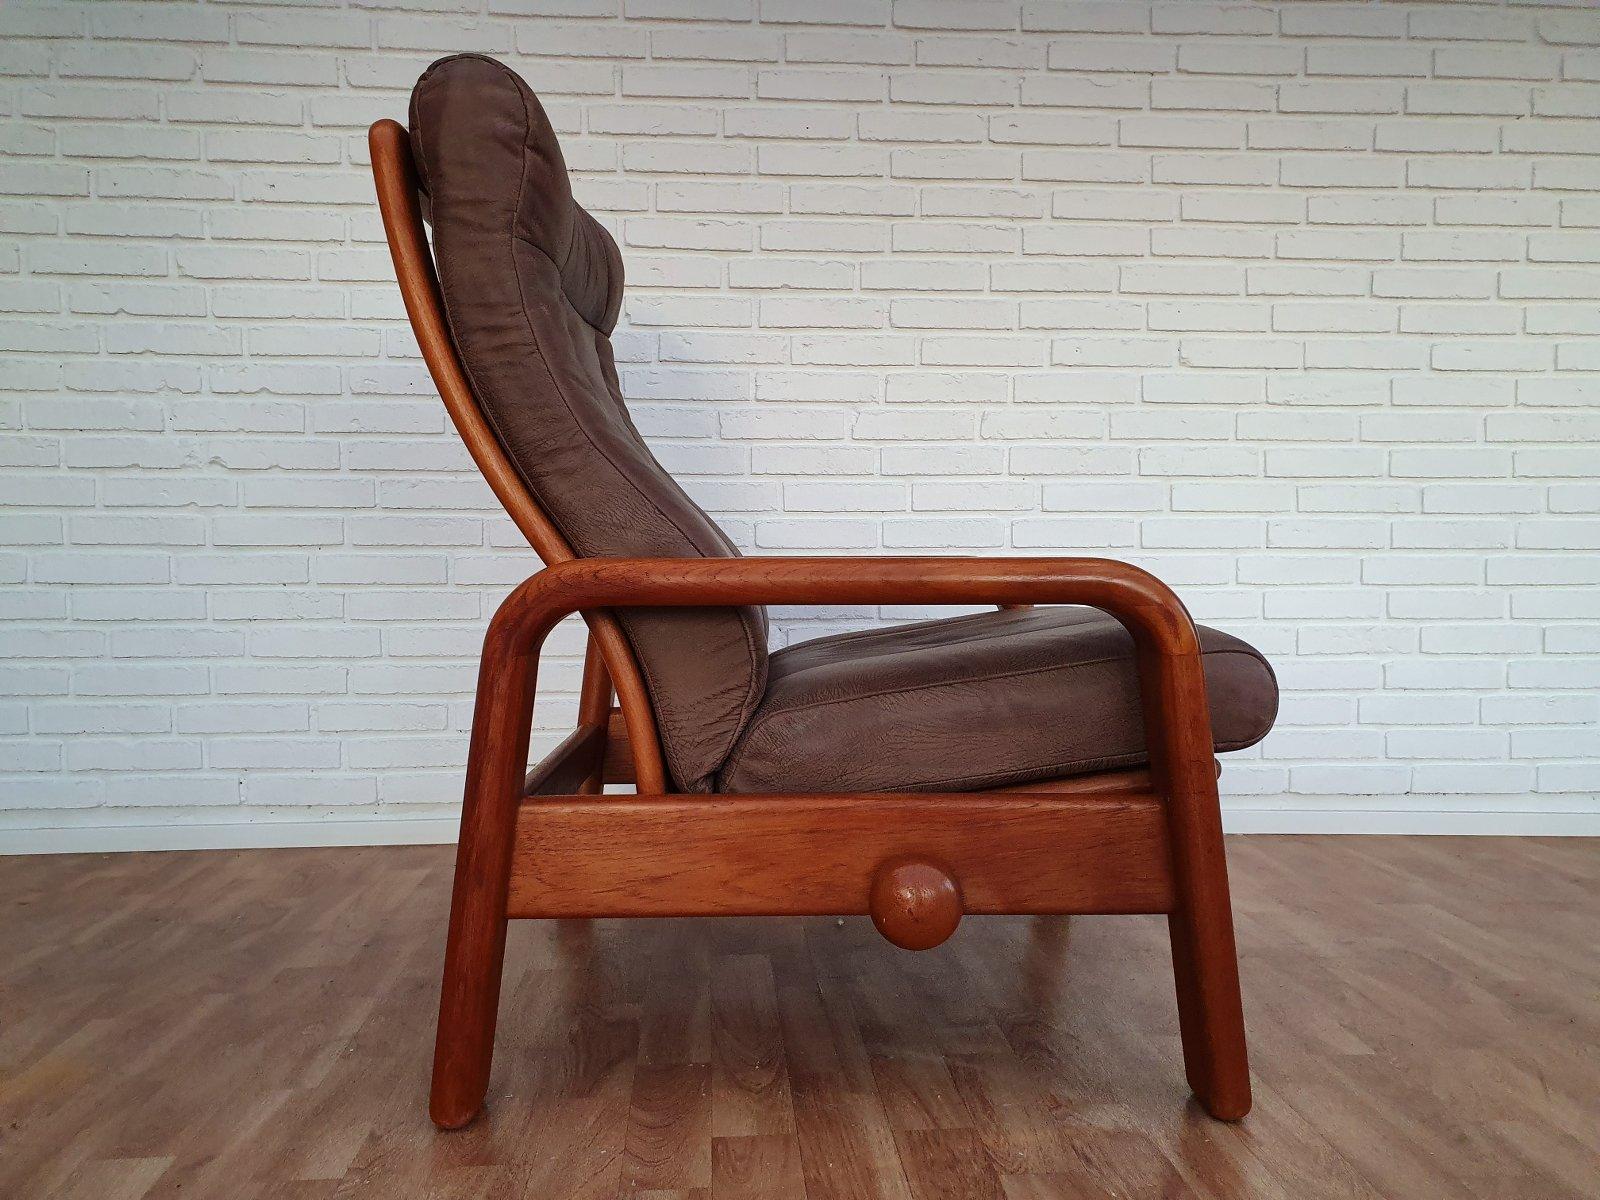 80s, Danish Adjustable Lounge Chair, Hs Design, Nubuck Leather, Solid Teak Wood In Good Condition For Sale In Tarm, 82